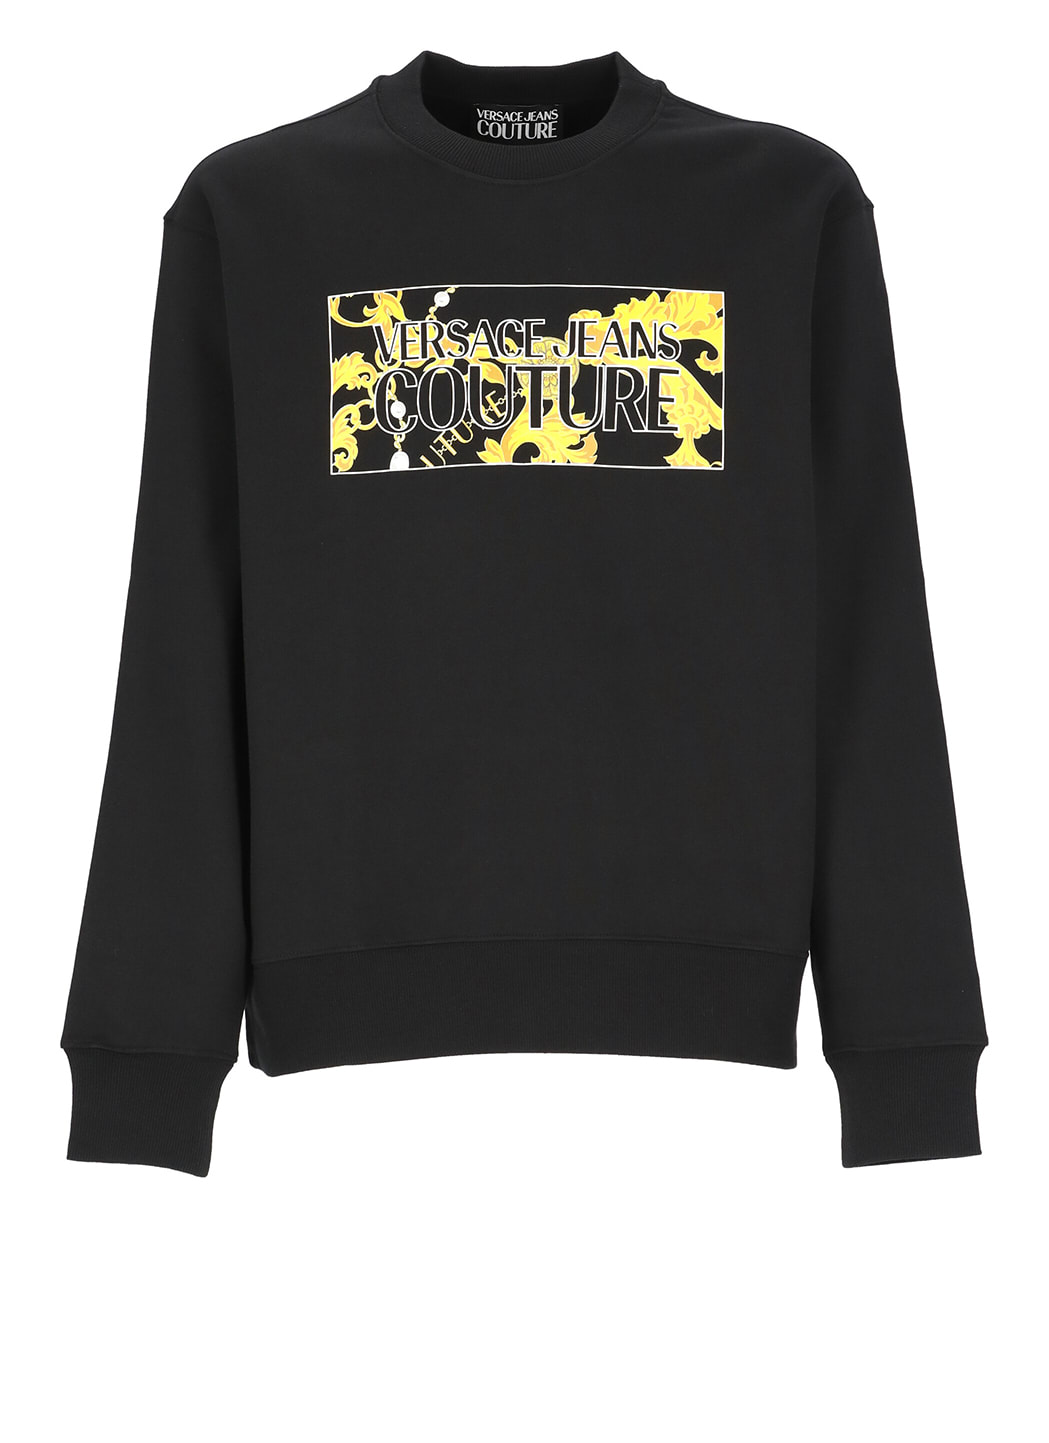 VERSACE JEANS COUTURE SQUARE PEARLS SWEATSHIRT